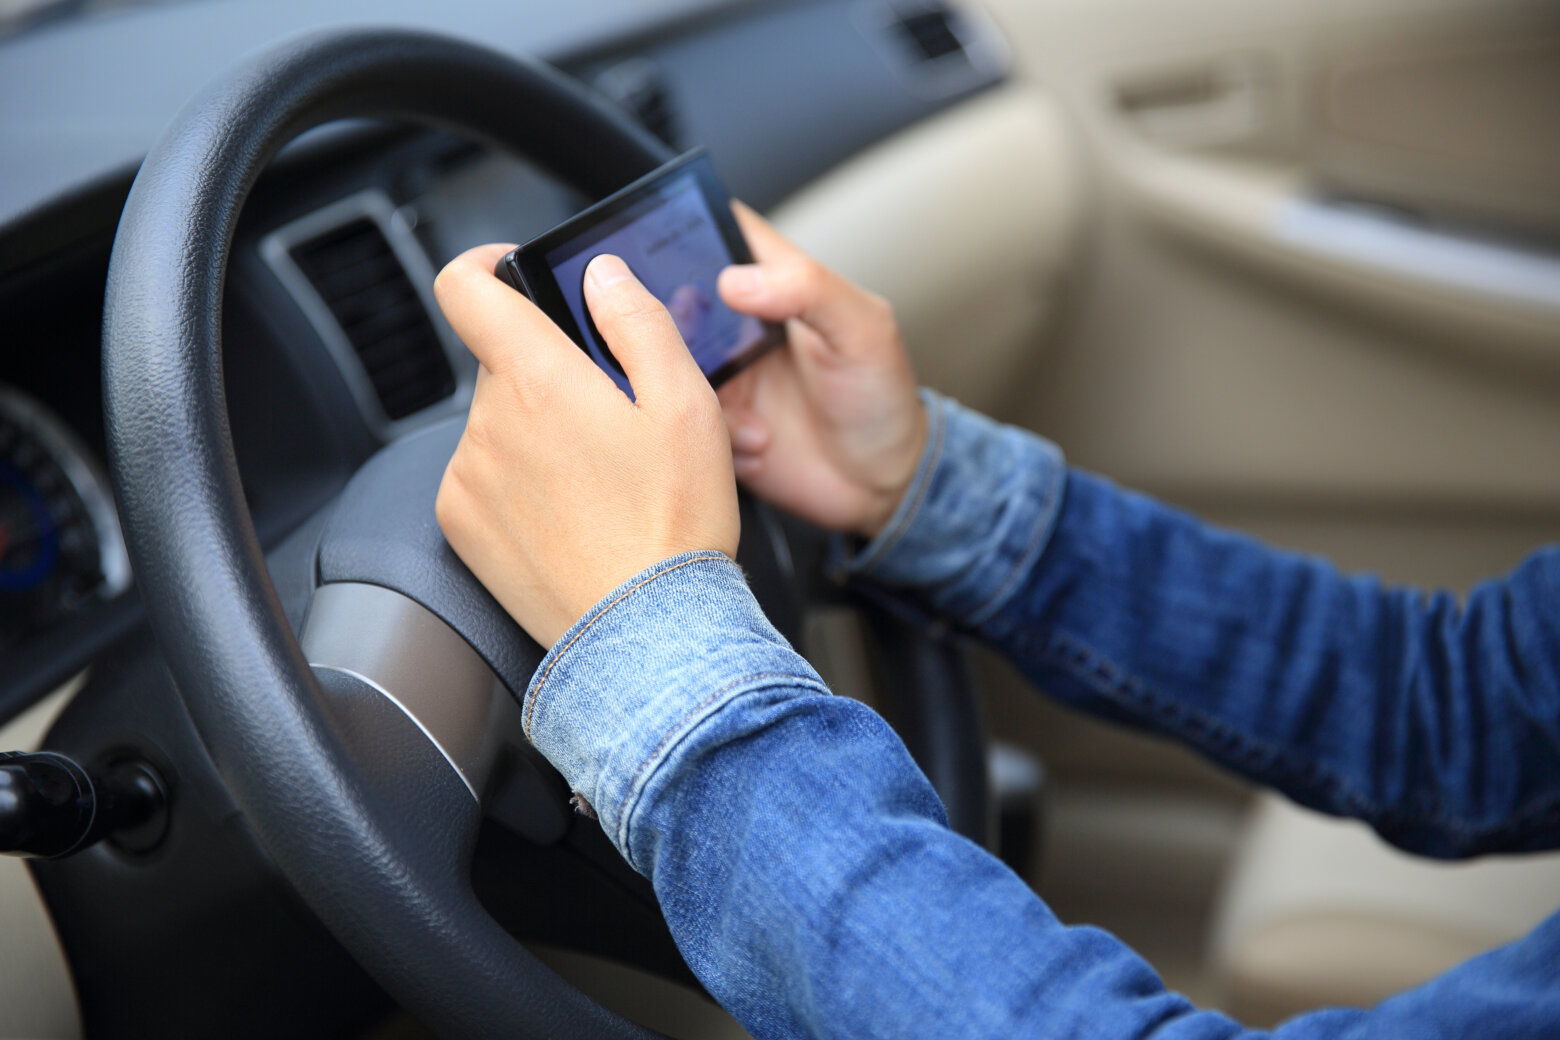 DC tough distracted-driving bill comes up for vote Tuesday